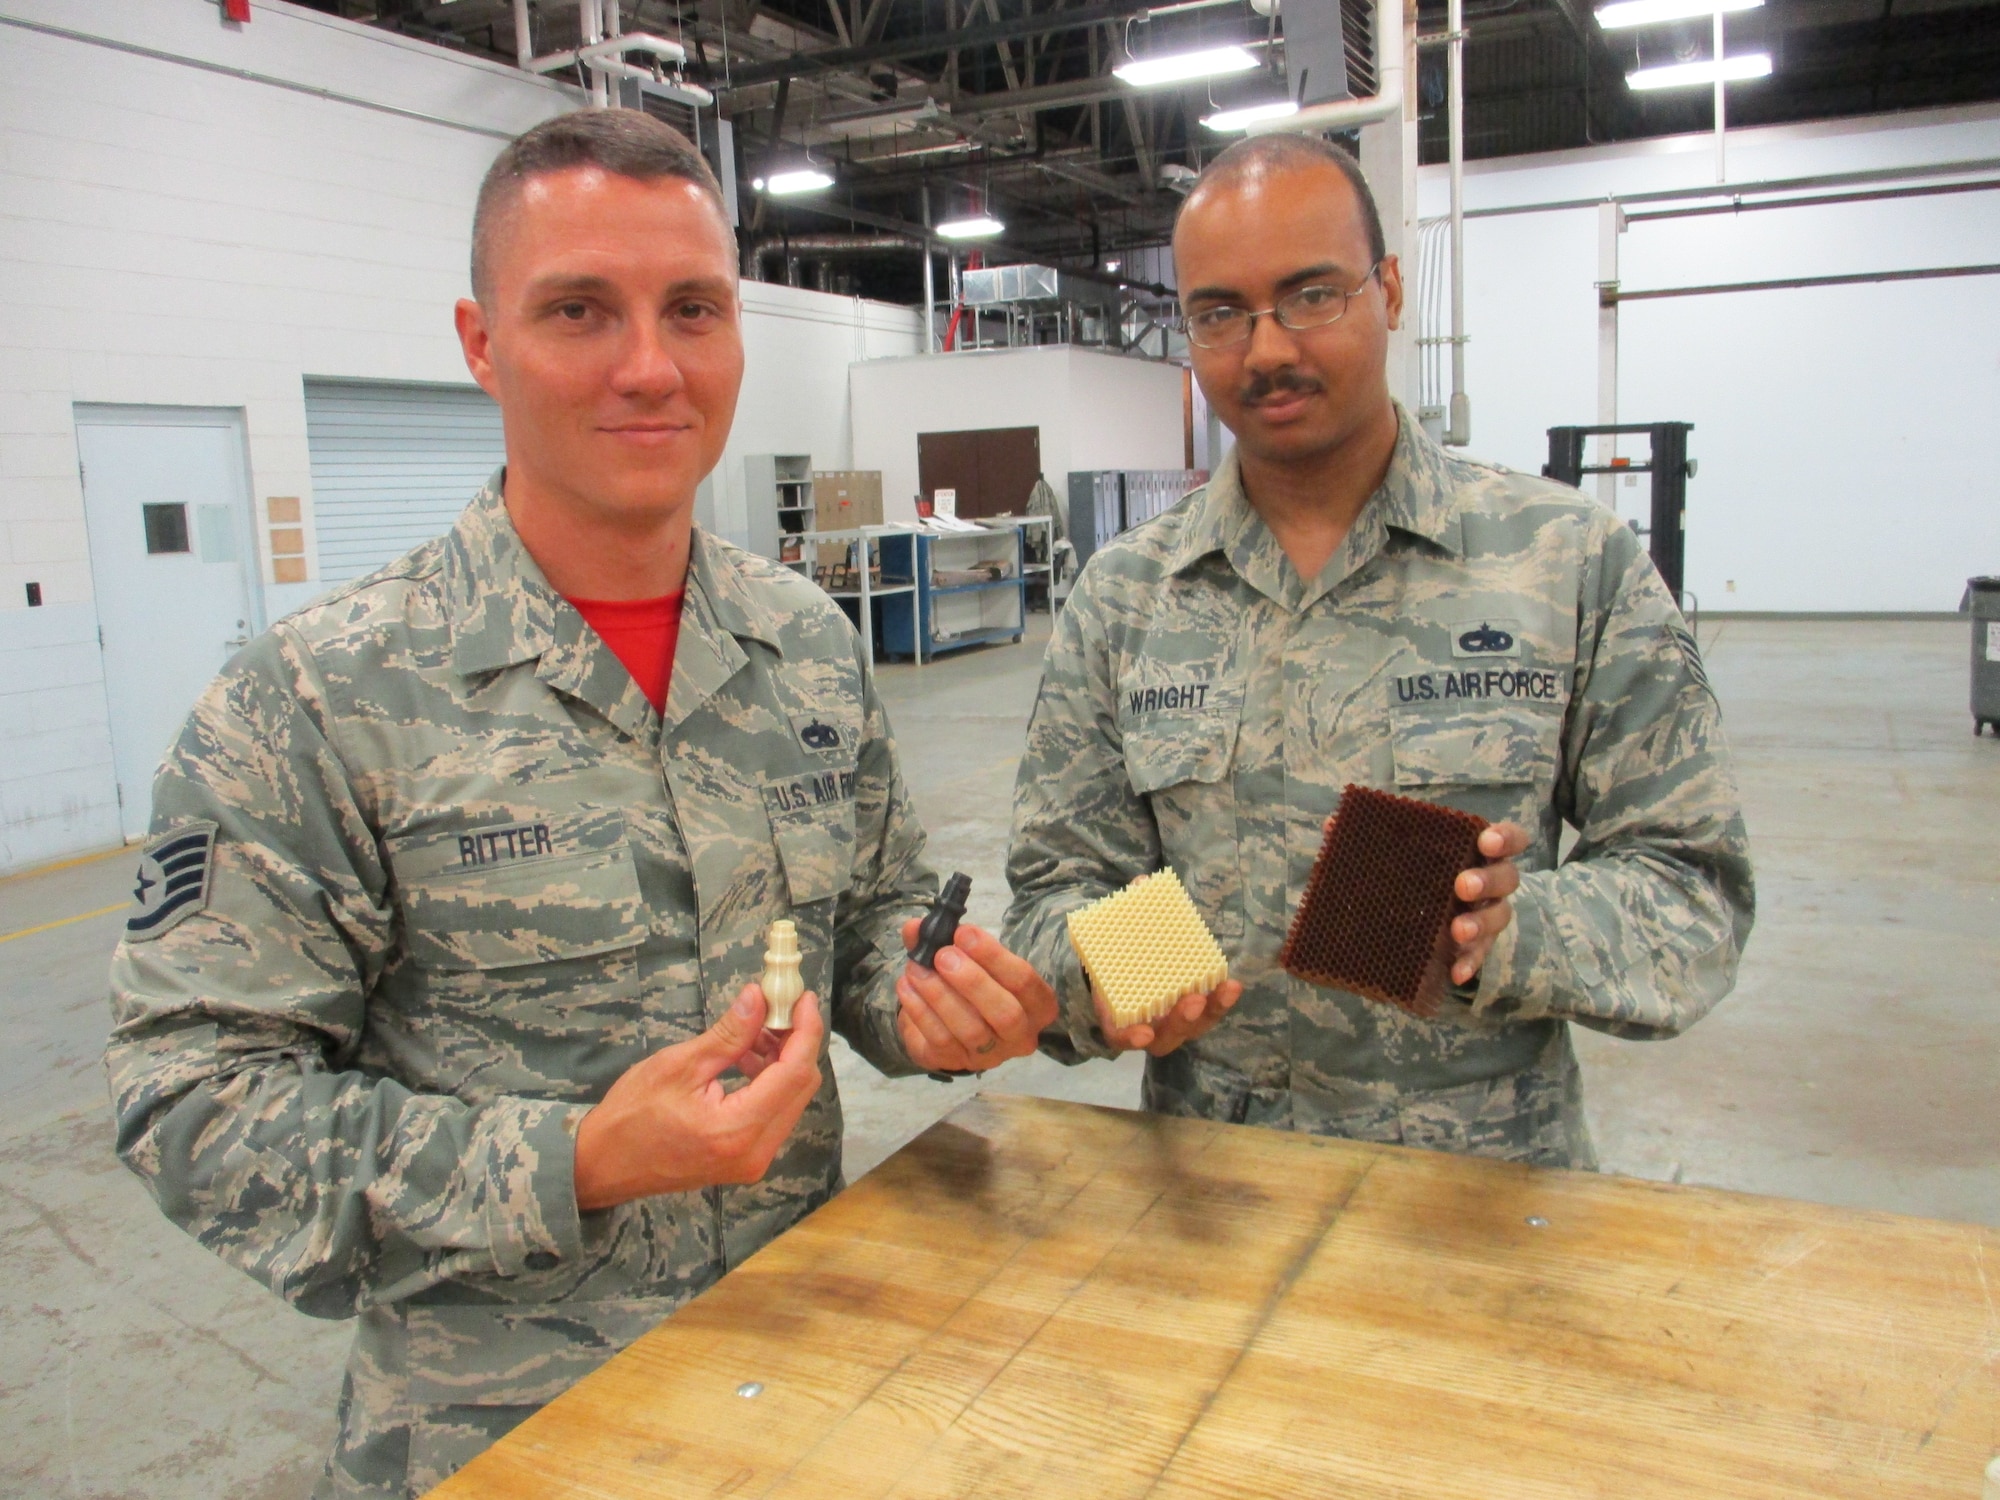 Staff Sgt. Christopher Ritter, 513th Maintenance Squadron Section Chief, and Staff Sgt. Michael Wright, 552nd Maintenance Squadron Aircraft Metals Technology, show the difference between 3-D printed parts and manufactured parts.  Whether printing up something as simple as a plastic seat handle or as complex as a replacement for phenolic resin honeycomb, 3-D printing saves Tinker AFB's Team AWACS time and money while improving aircraft readiness. (U.S. Air Force photo by Master Sgt. Andrew Stephens)